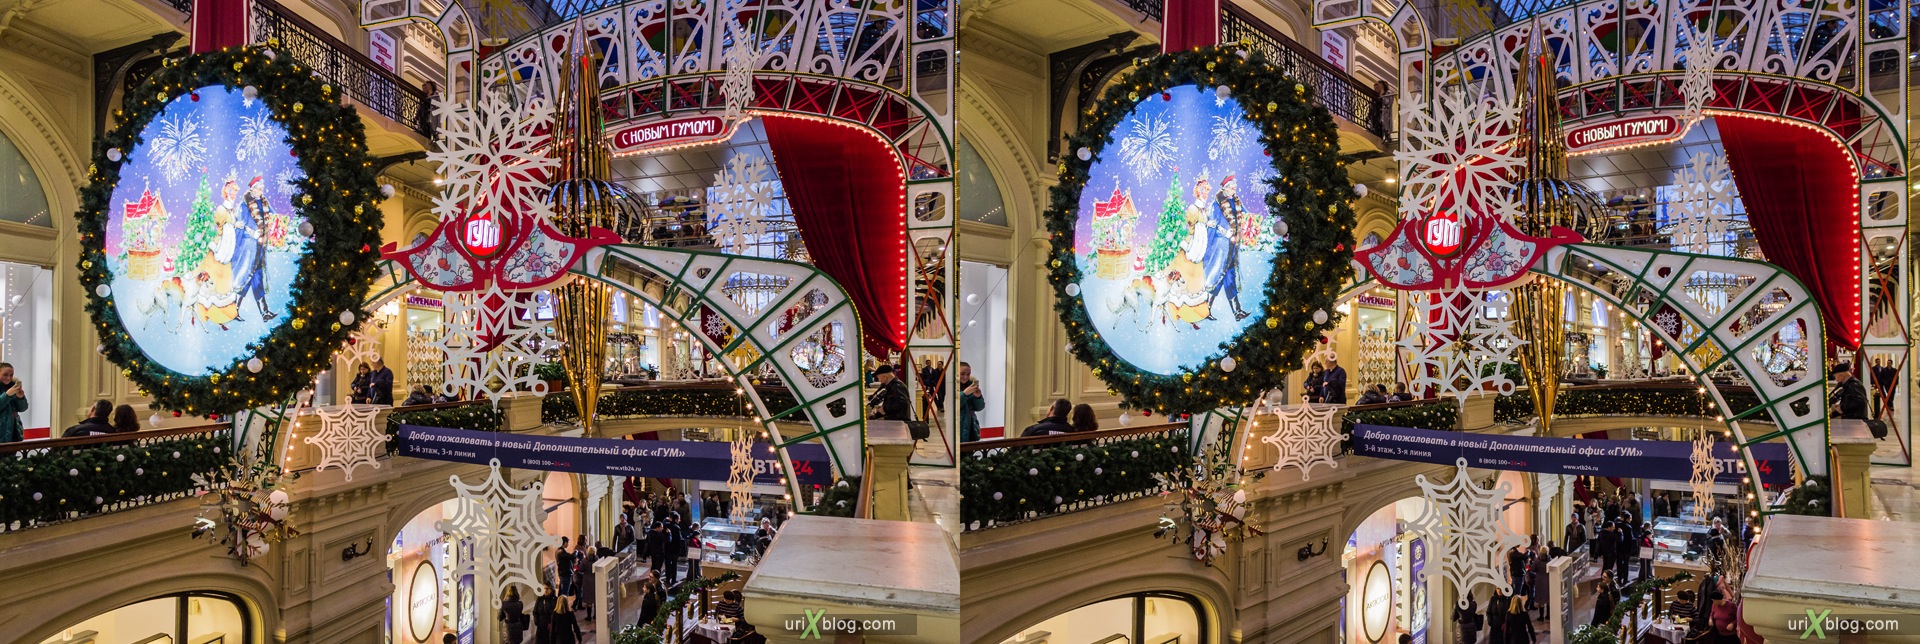 2013, Moscow, Russia, GUM, shop, mall, 3D, stereo pair, cross-eyed, crossview, cross view stereo pair, stereoscopic